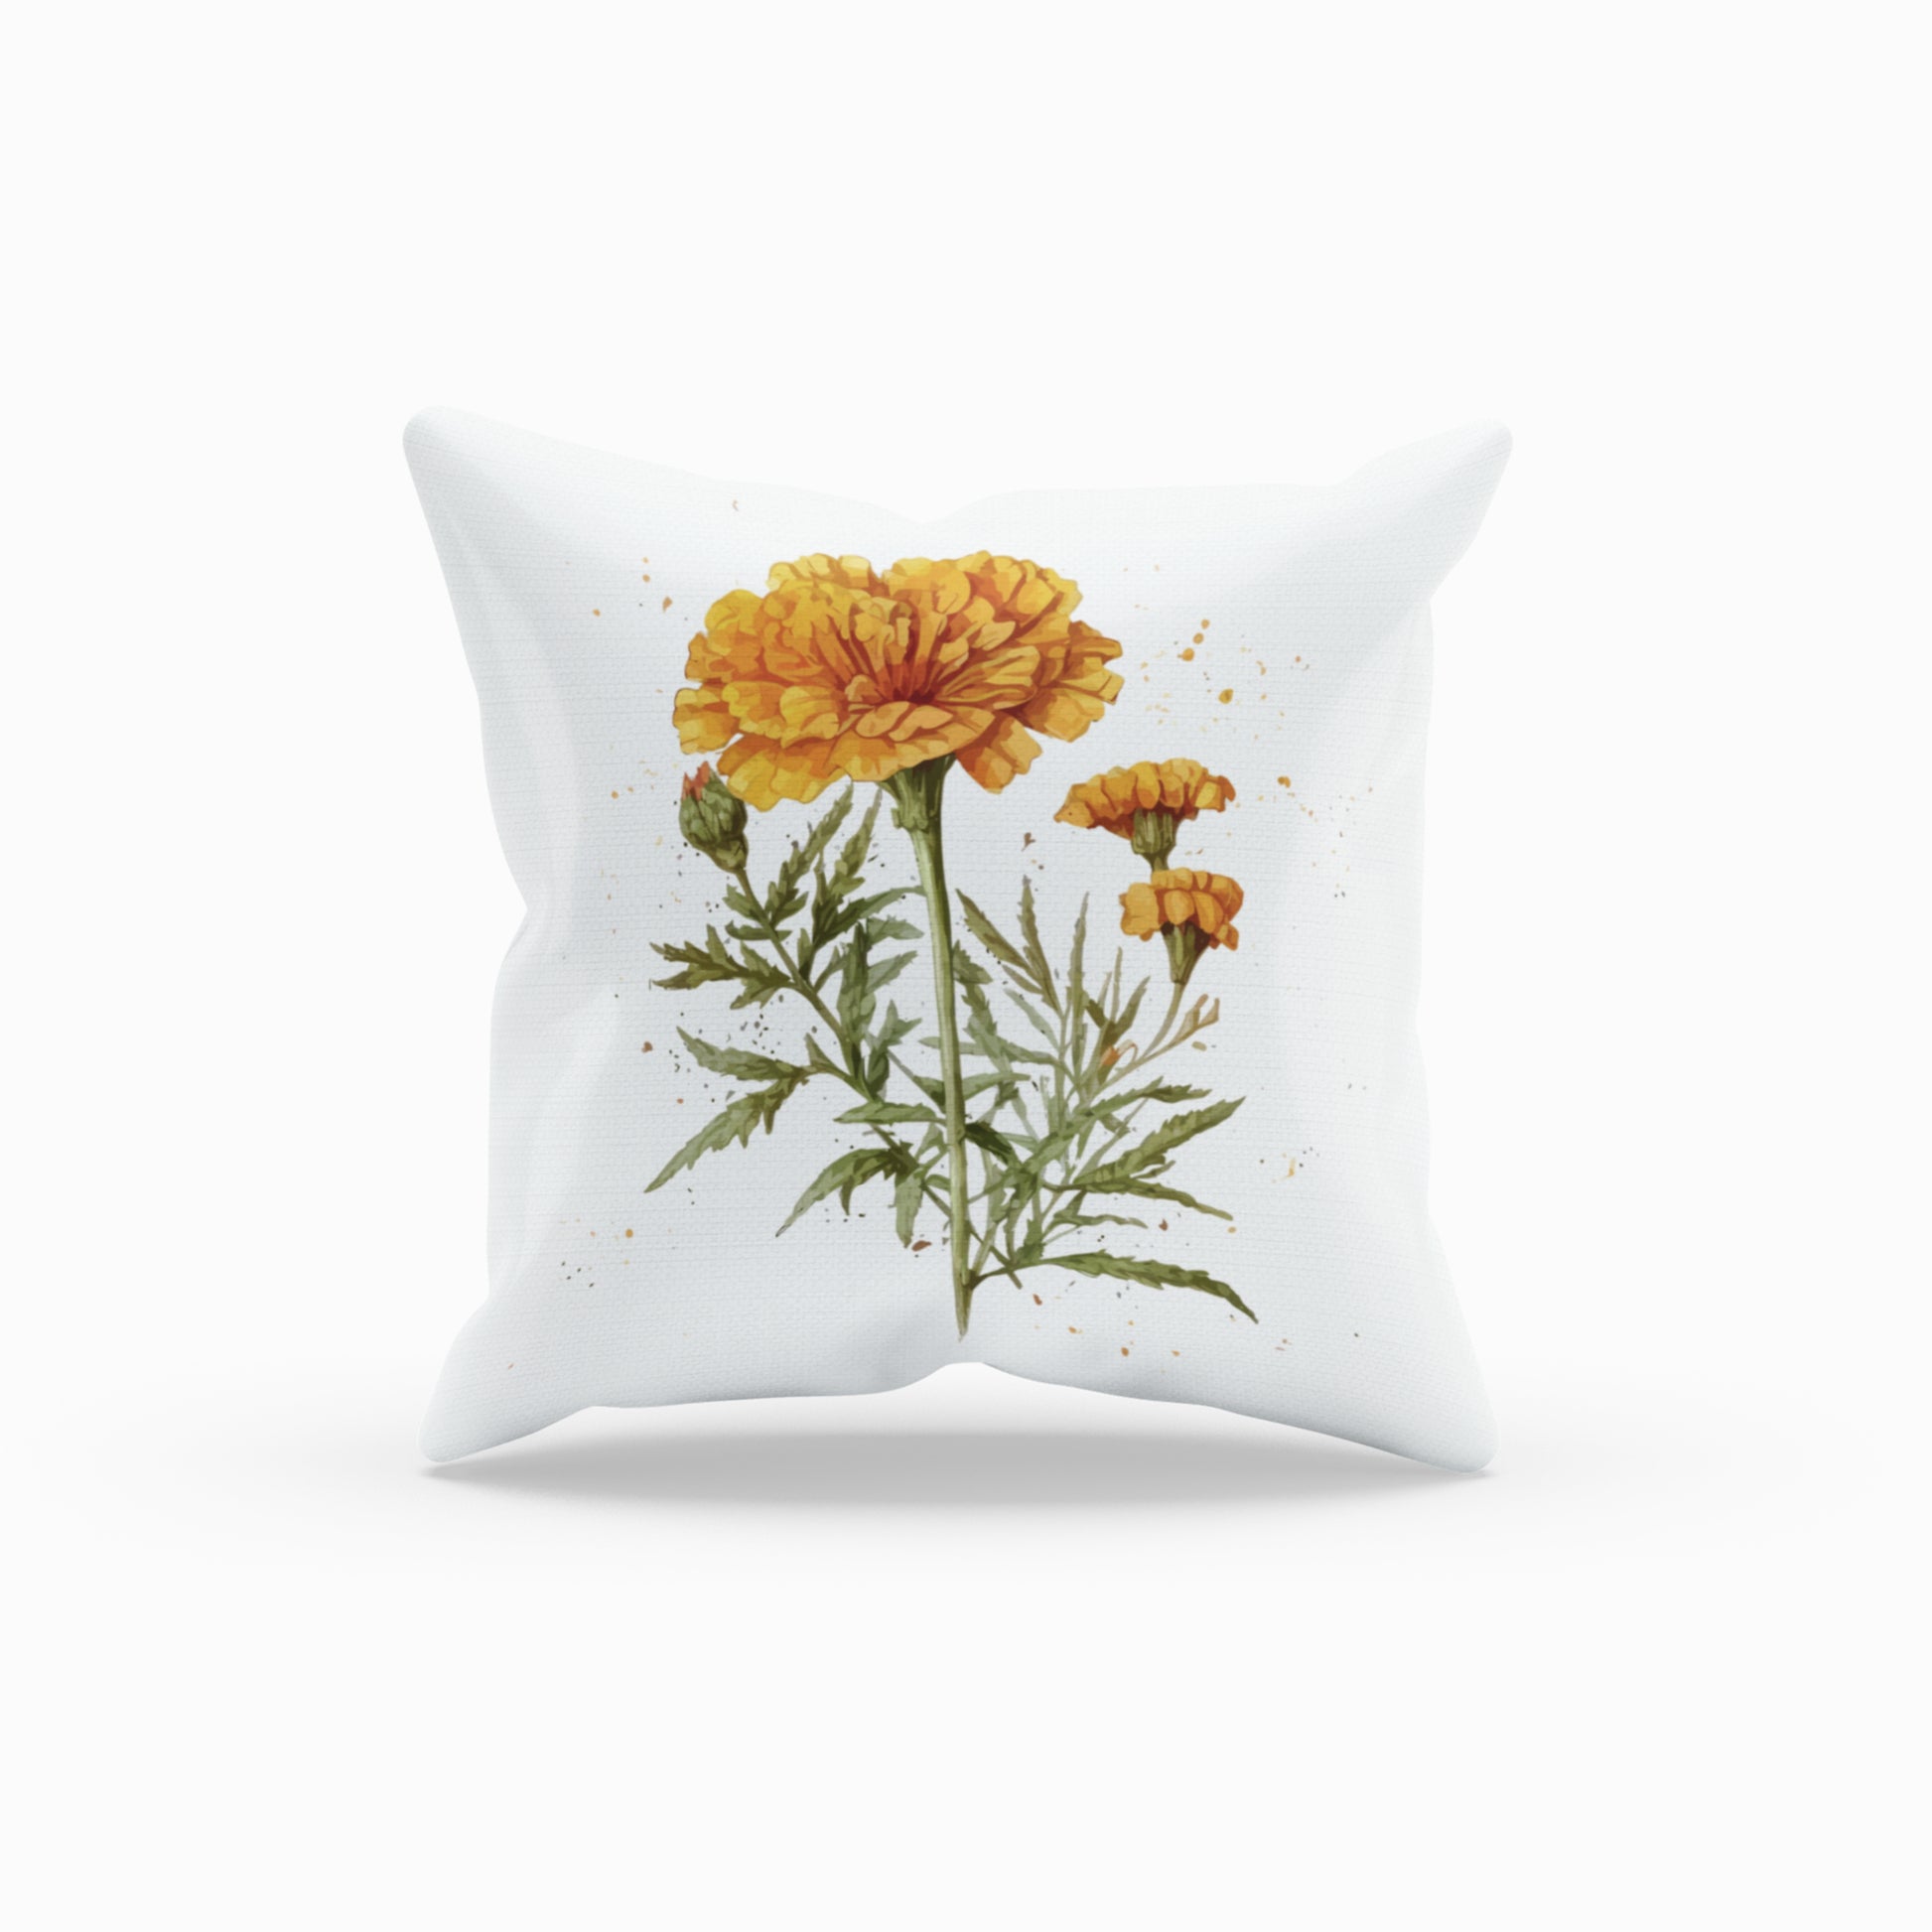 Stylish Printed Throw Pillow with Floral Pattern